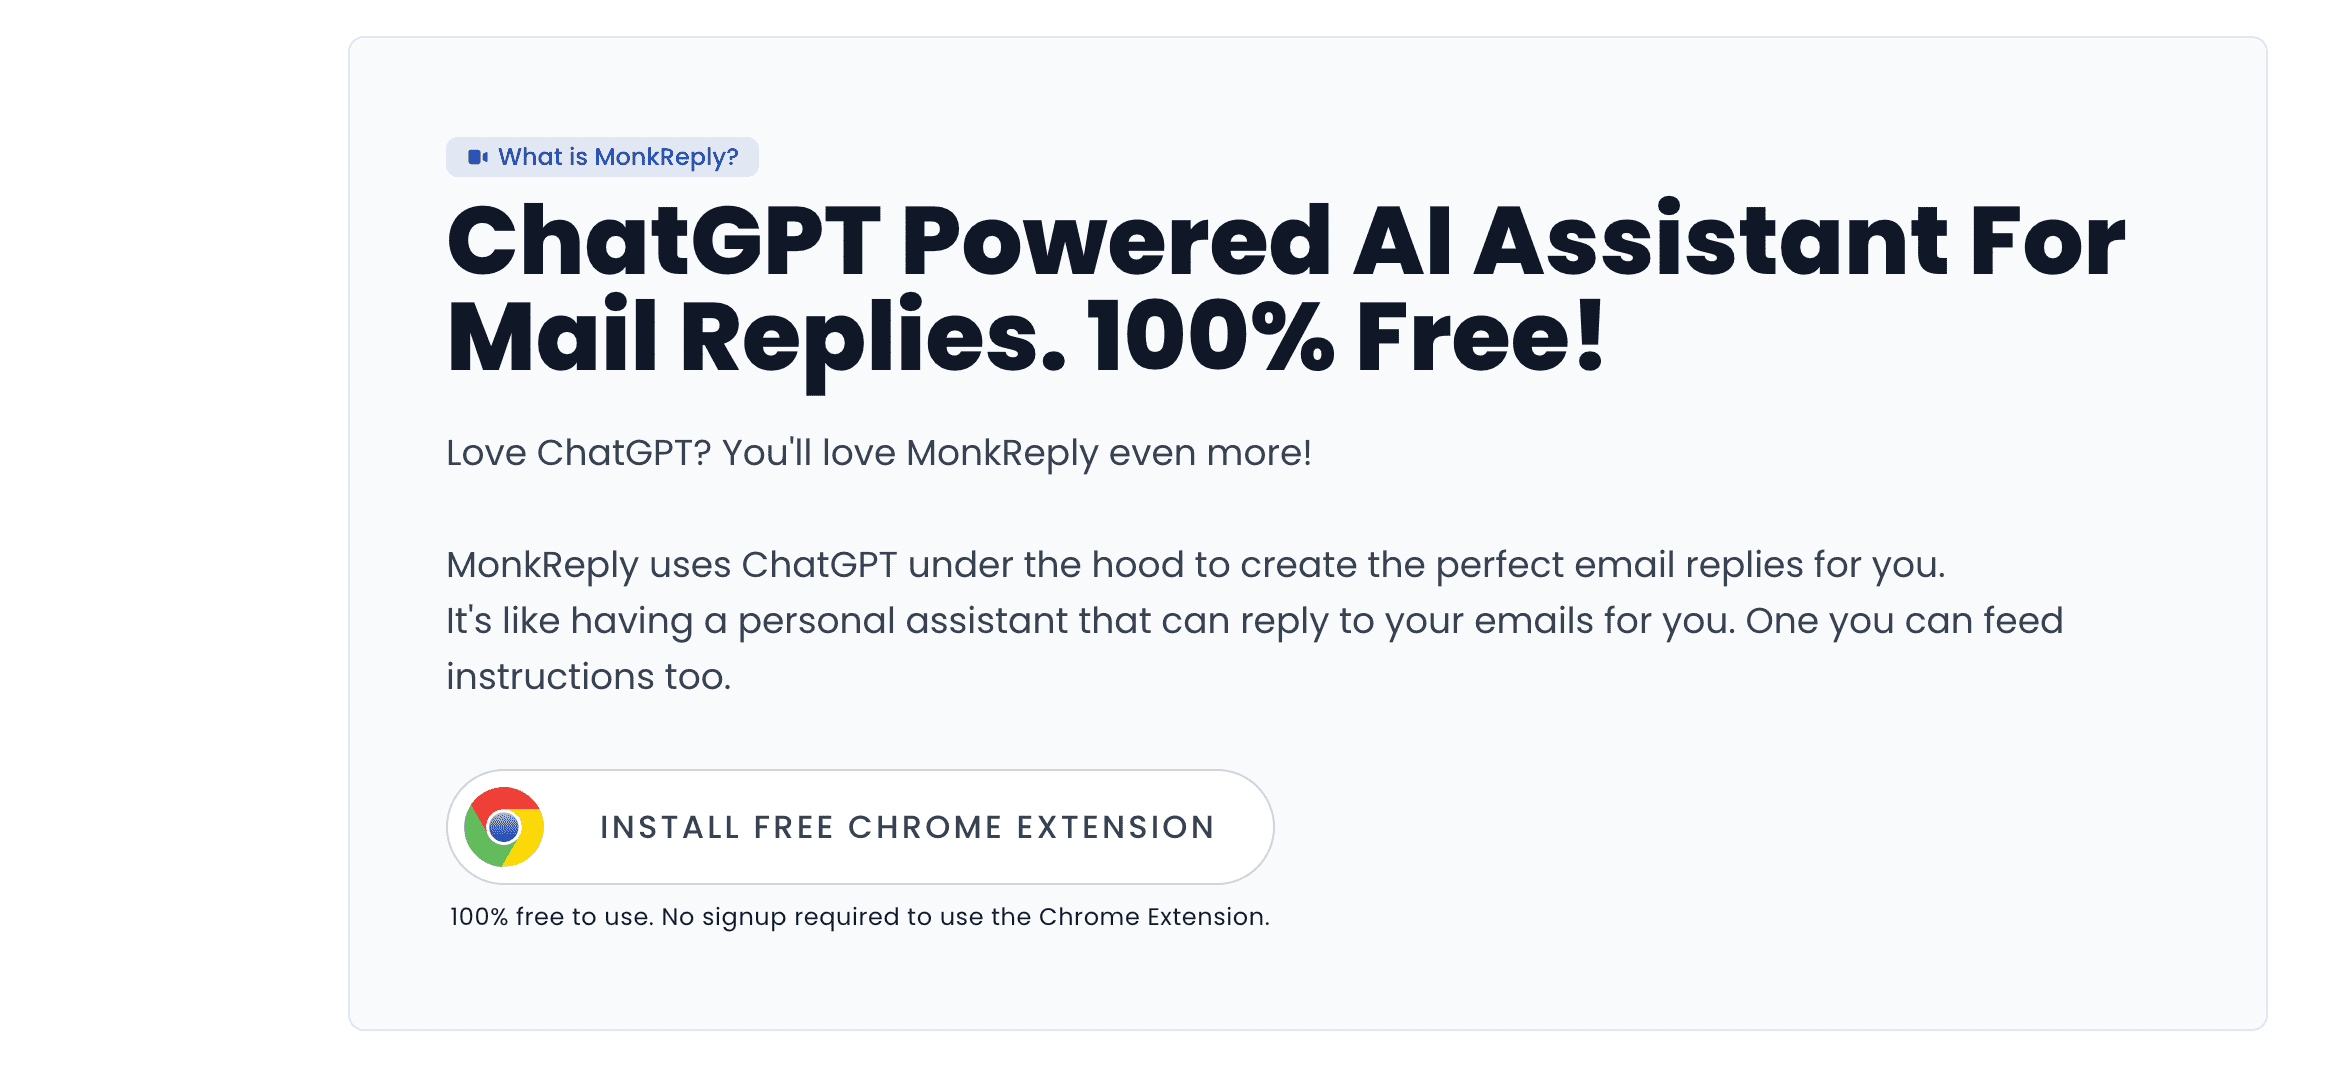 Perfect Emails by MonkReply - ChatGPT Powered Email Assistant cover